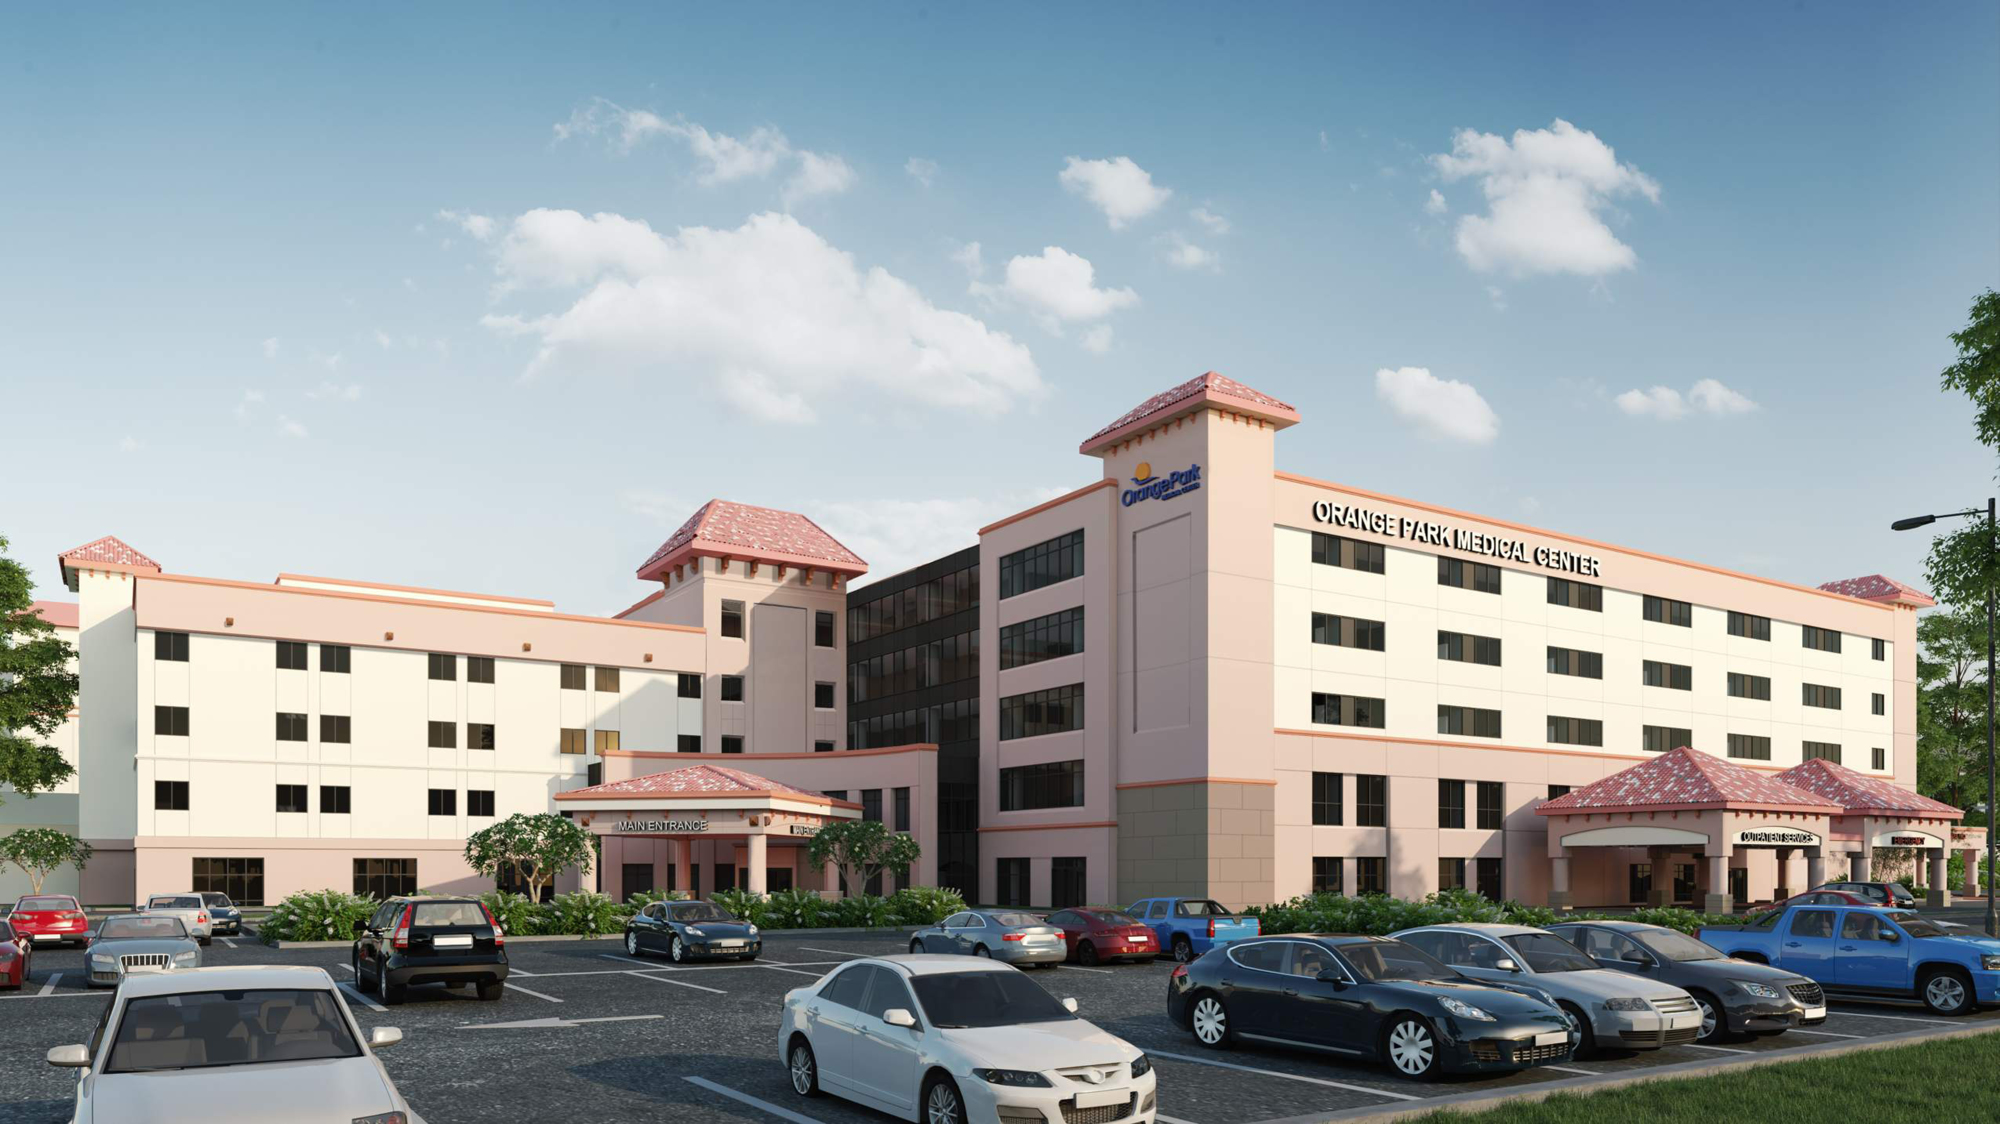 An artist's rendering of the Orange Park Medical Center patient tower.